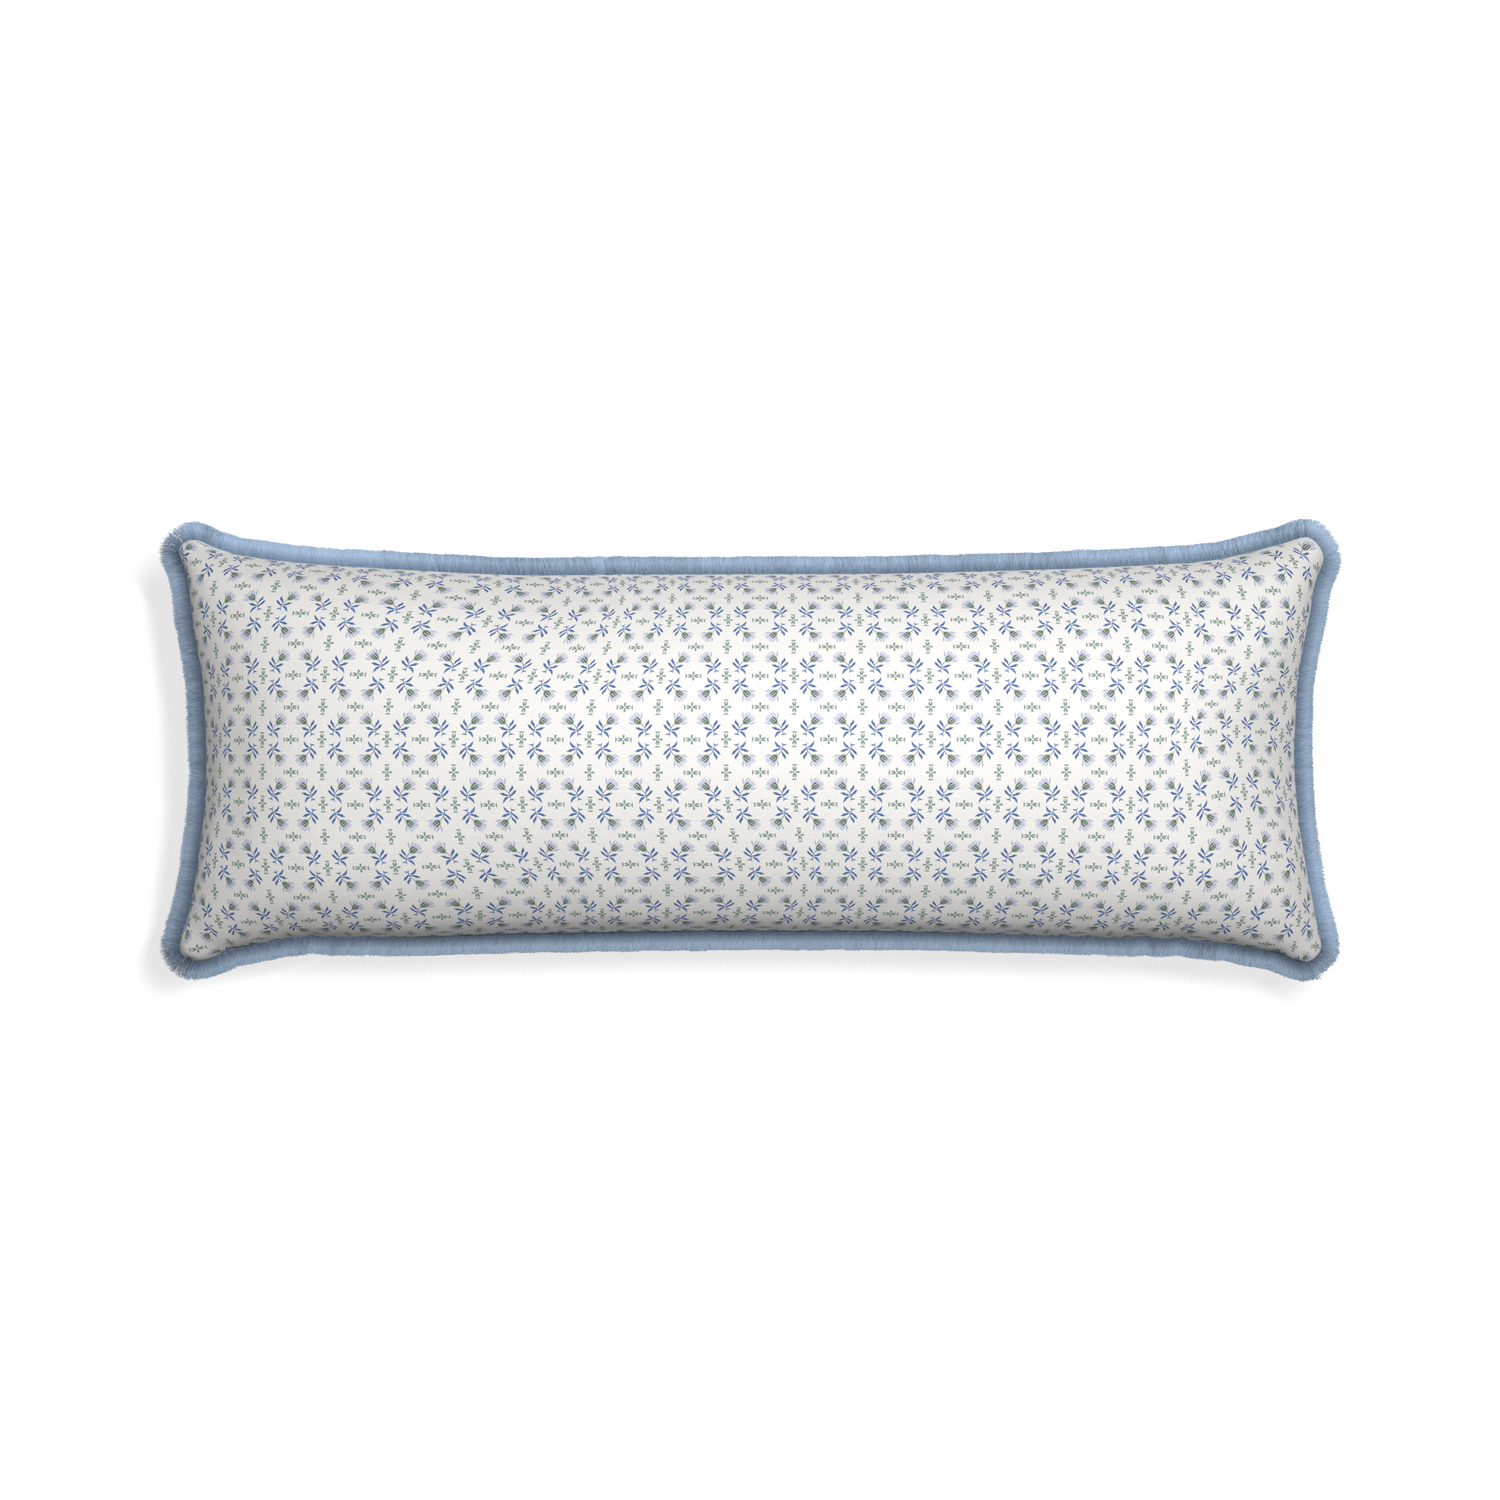 Xl-lumbar lee custom pillow with sky fringe on white background